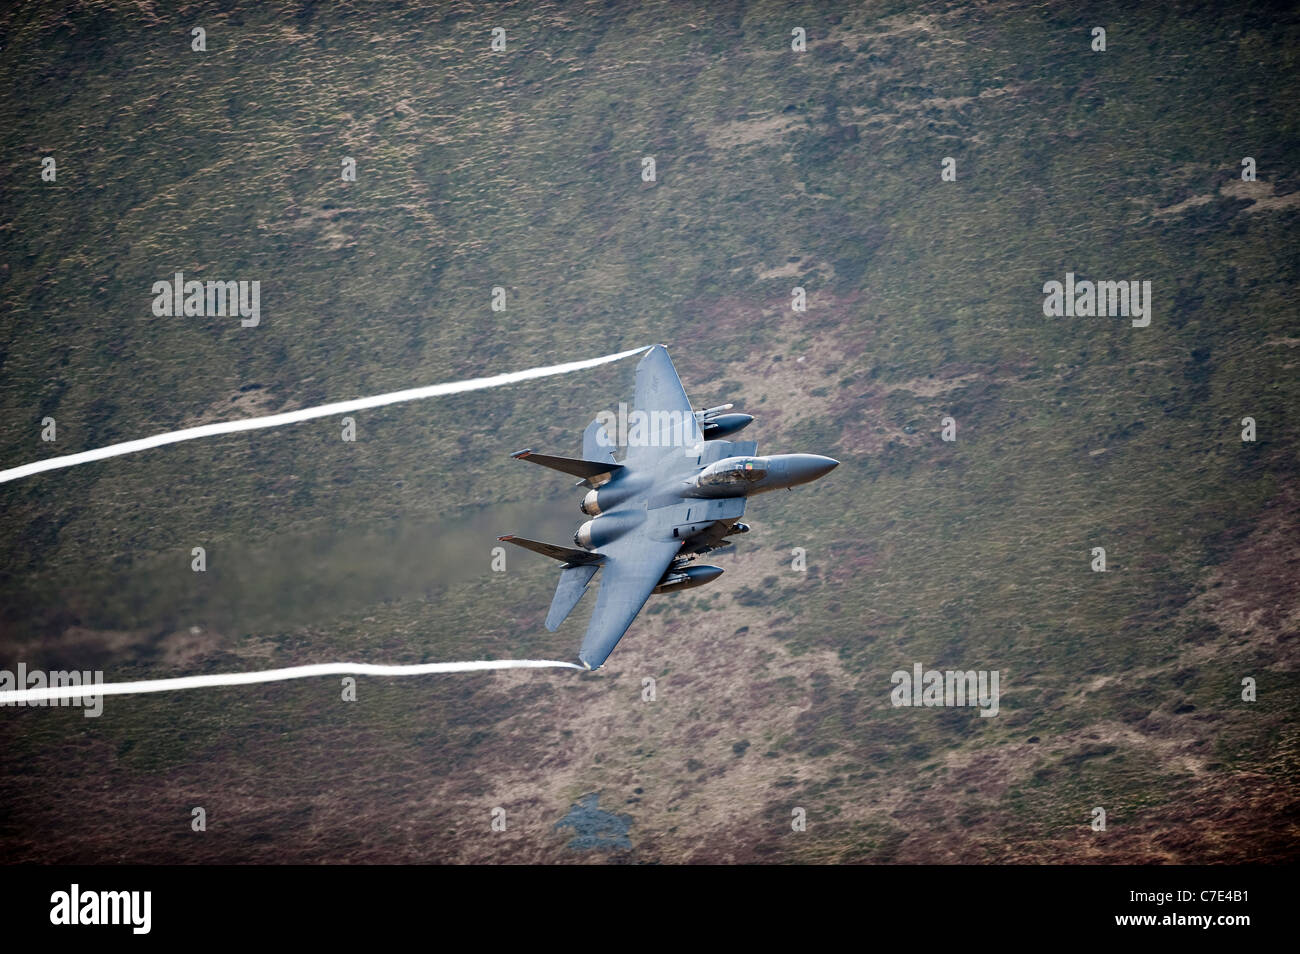 USAF F-15E Strike Eagle makes a turn during a low flying flight in mid Wales shot from the hill side Stock Photo